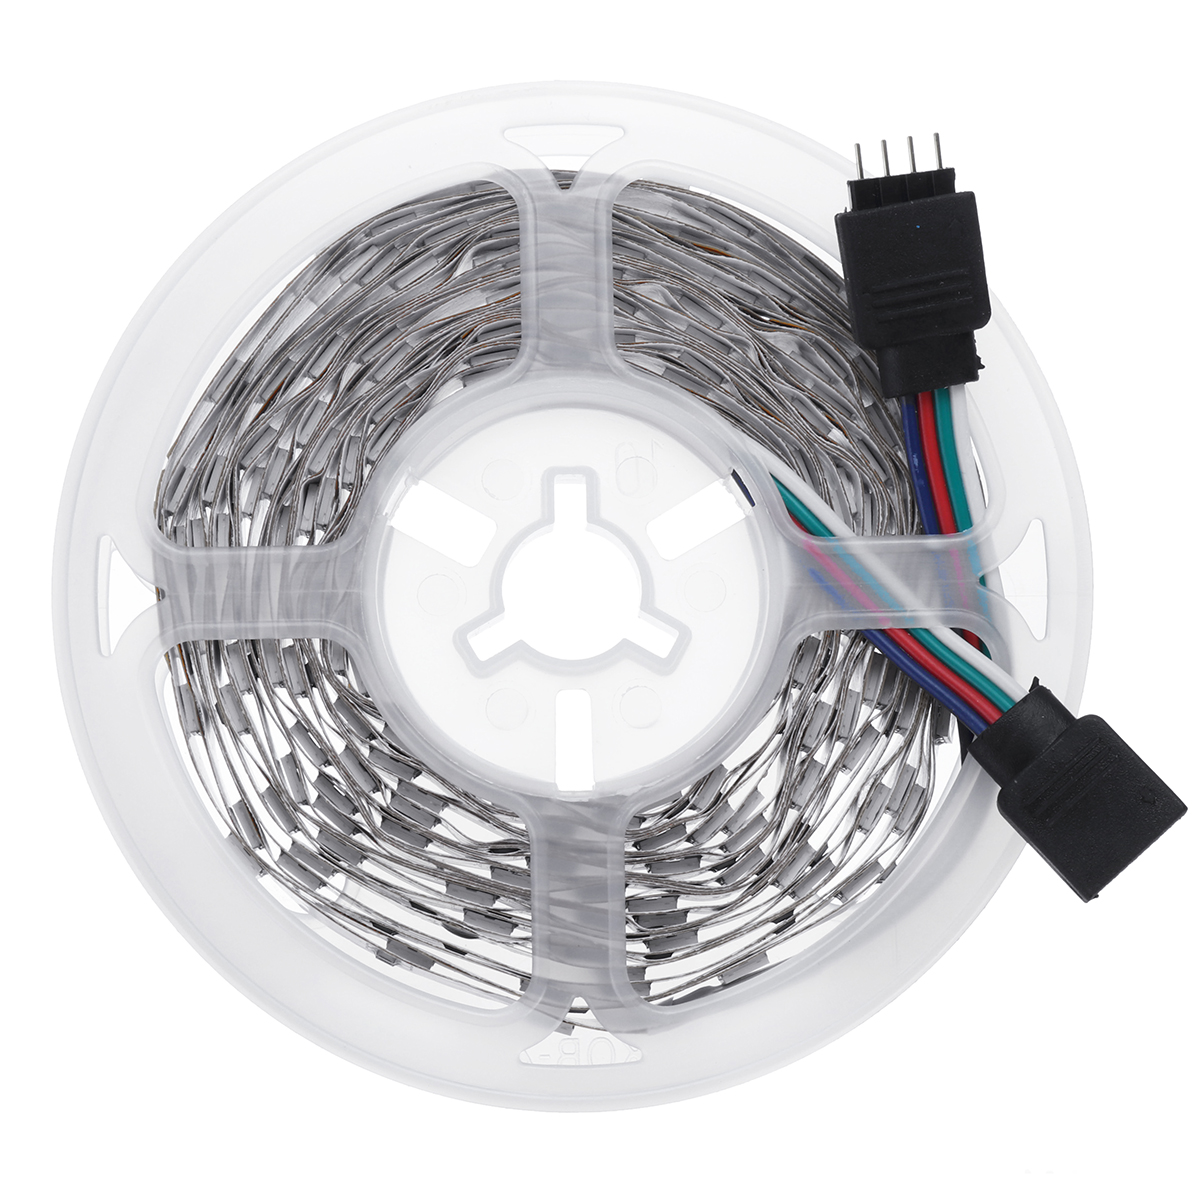 Find 5M/10M 5050SMD RGB Waterproof/Non waterproof LED Strip Light Remote Control UK Power Adapter DC12V for Sale on Gipsybee.com with cryptocurrencies